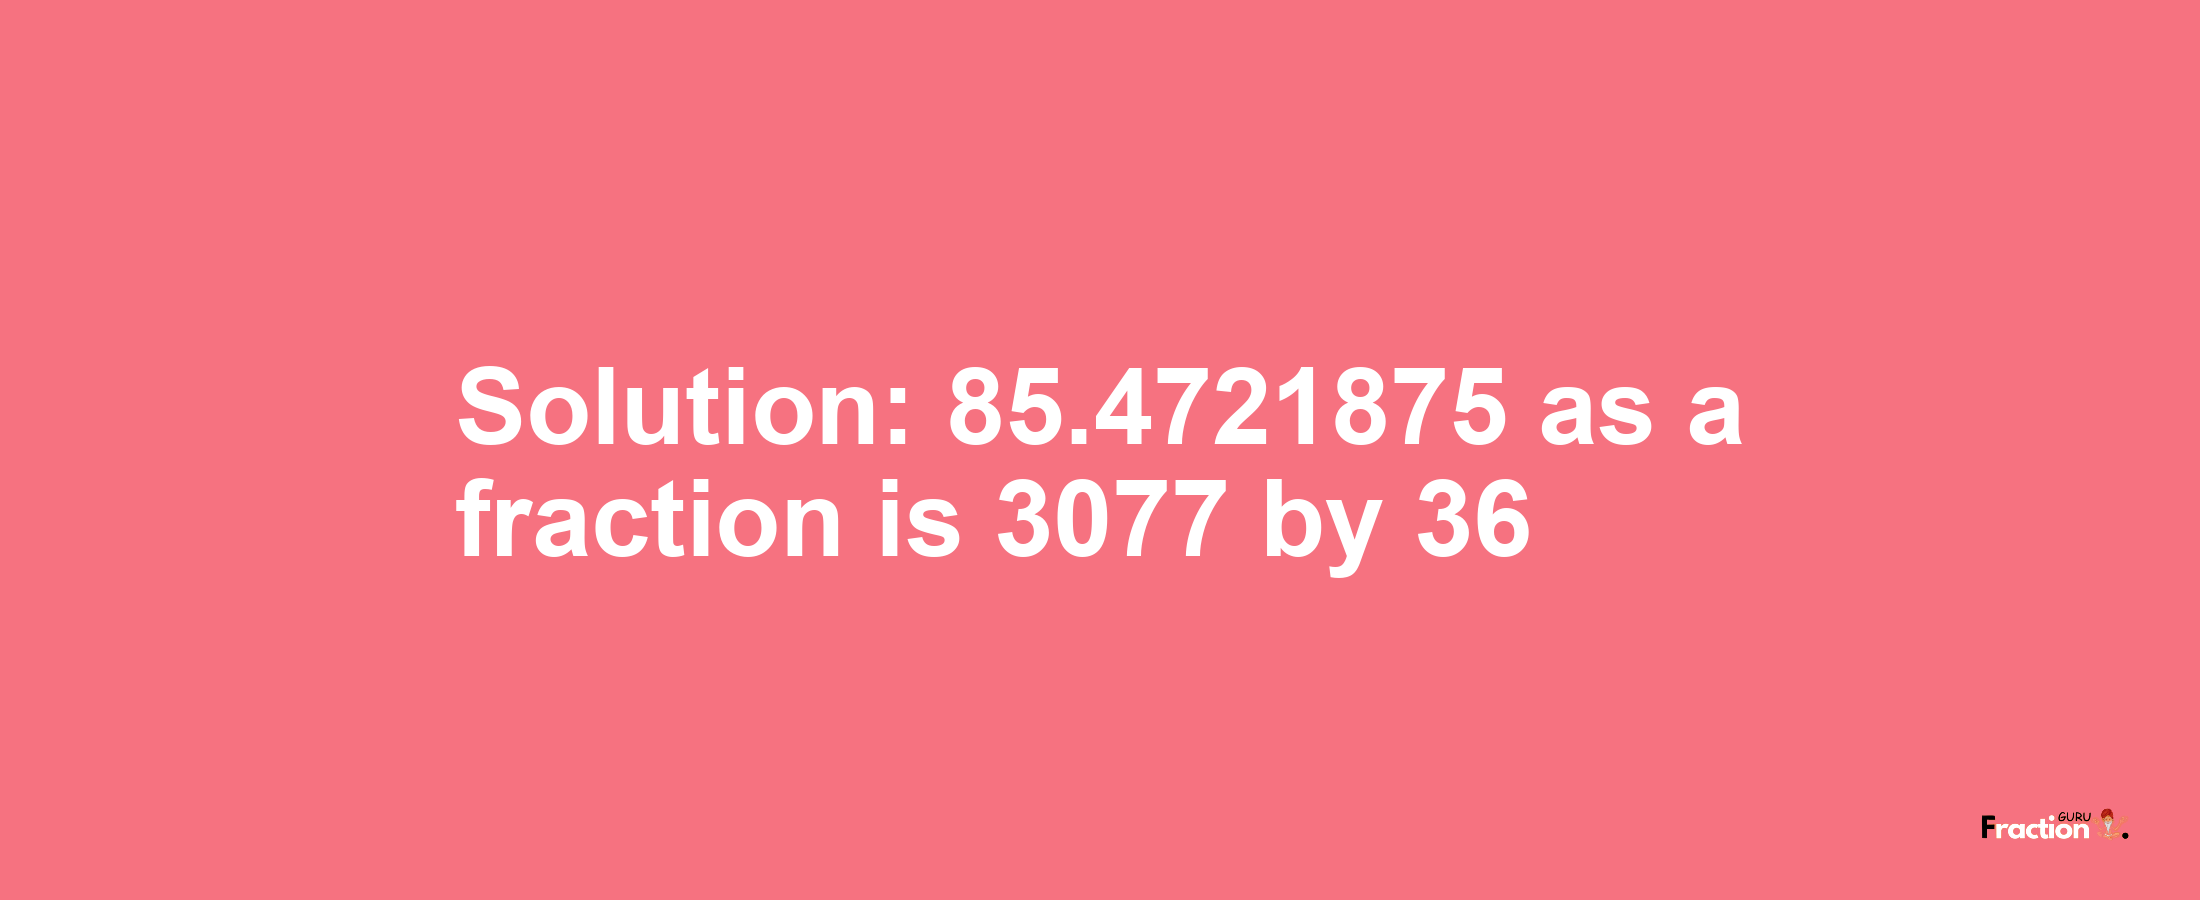 Solution:85.4721875 as a fraction is 3077/36